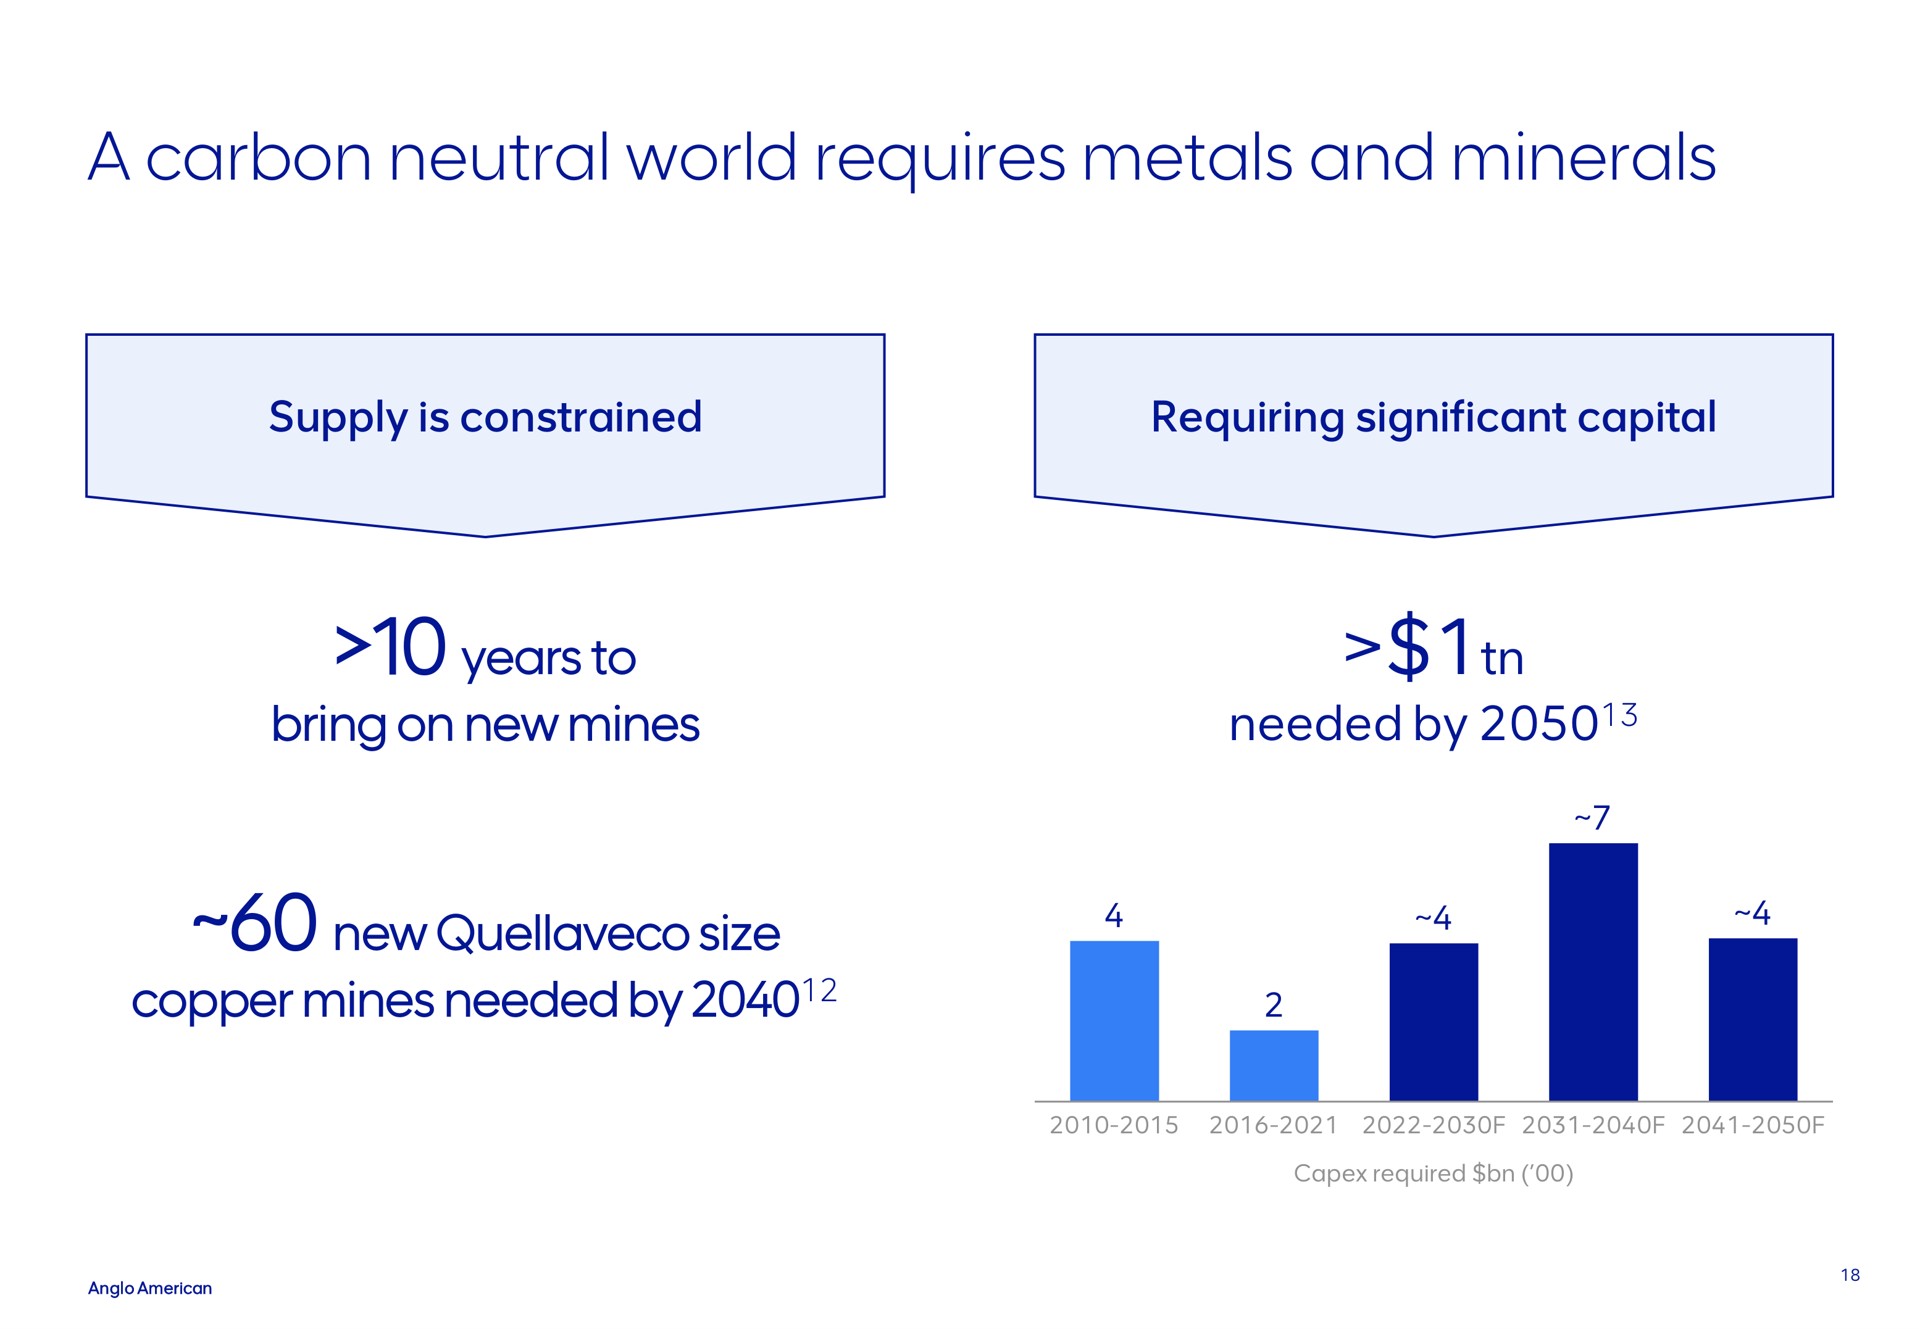 a carbon neutral world requires metals and minerals | AngloAmerican